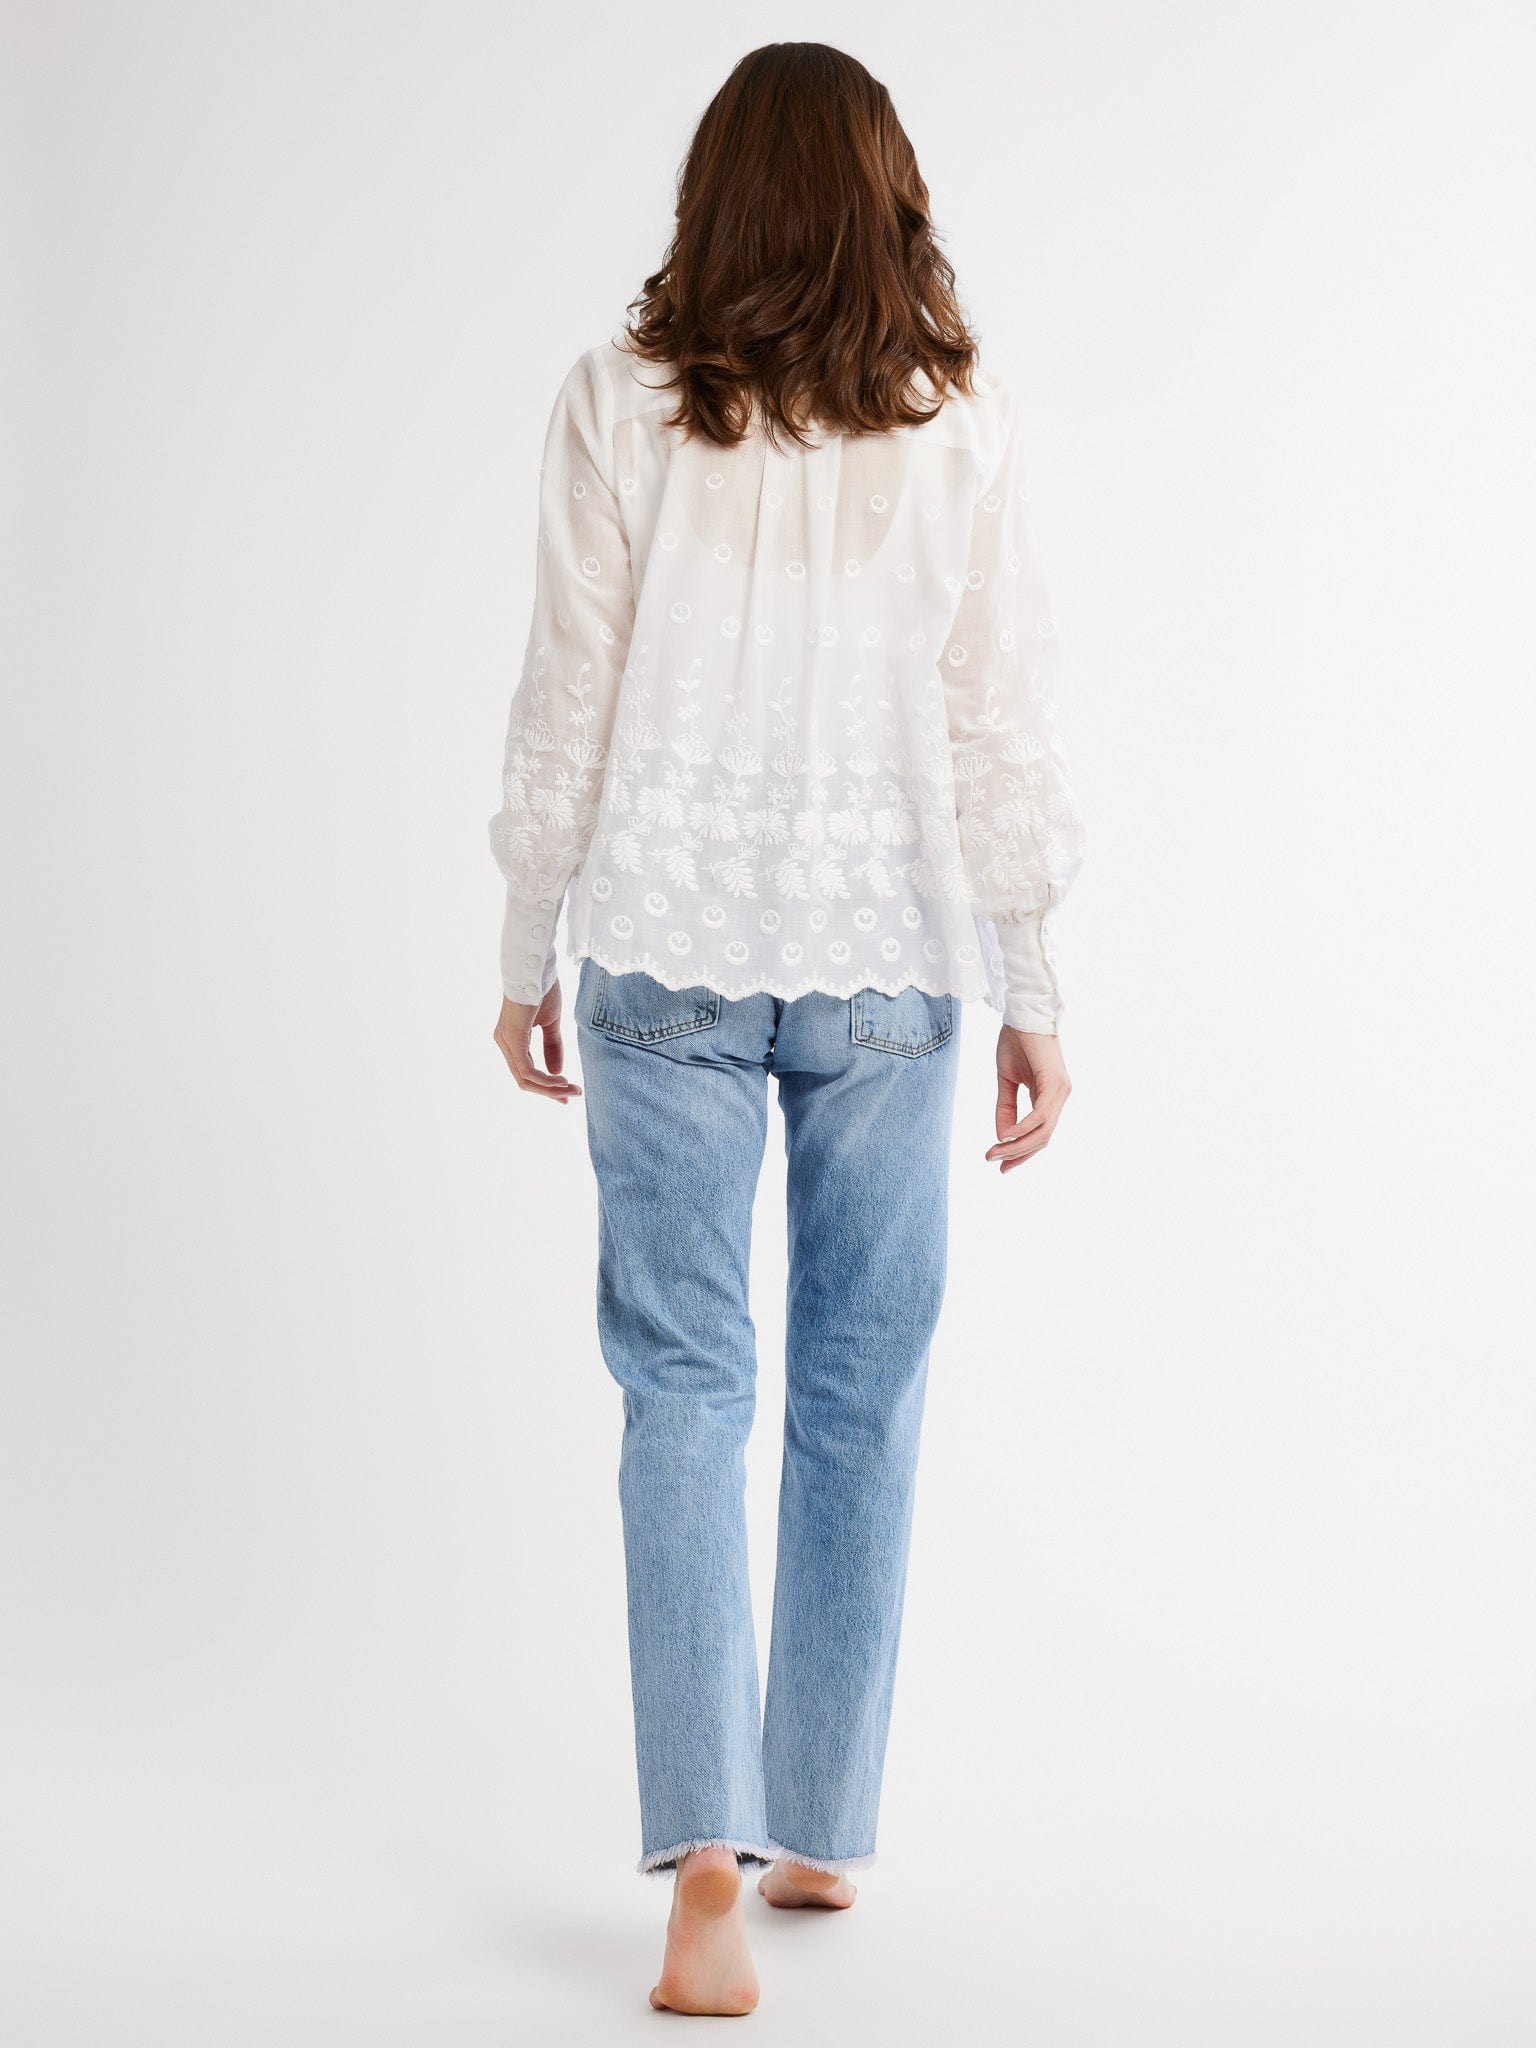 MILLE Clothing Freya Top in White Petal Embroidery